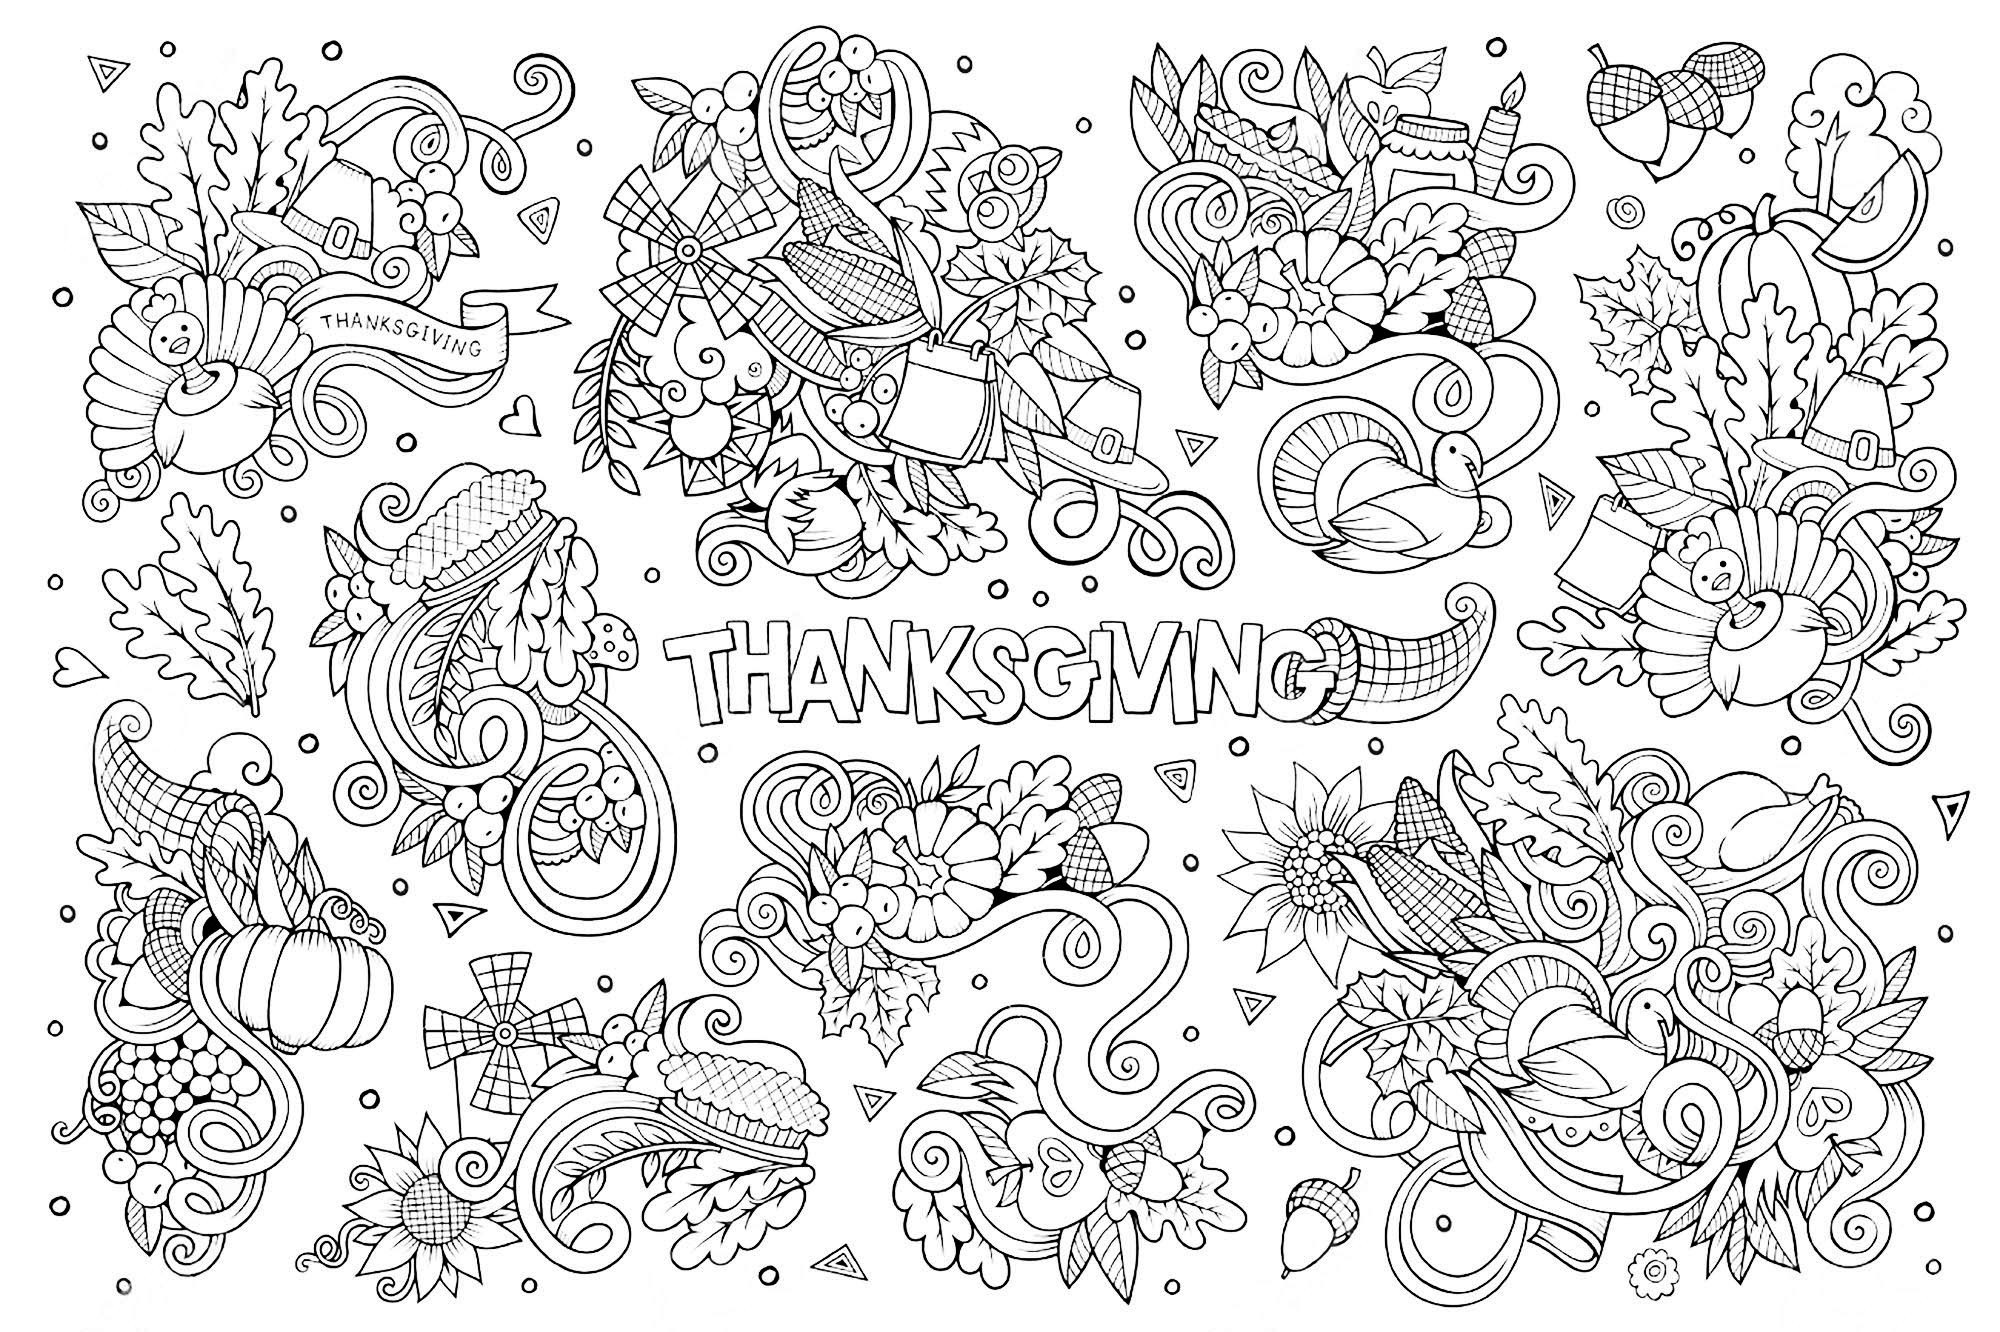 Thanksgiving Adult Coloring Pages
 FREE Thanksgiving Coloring Pages for Adults & Kids